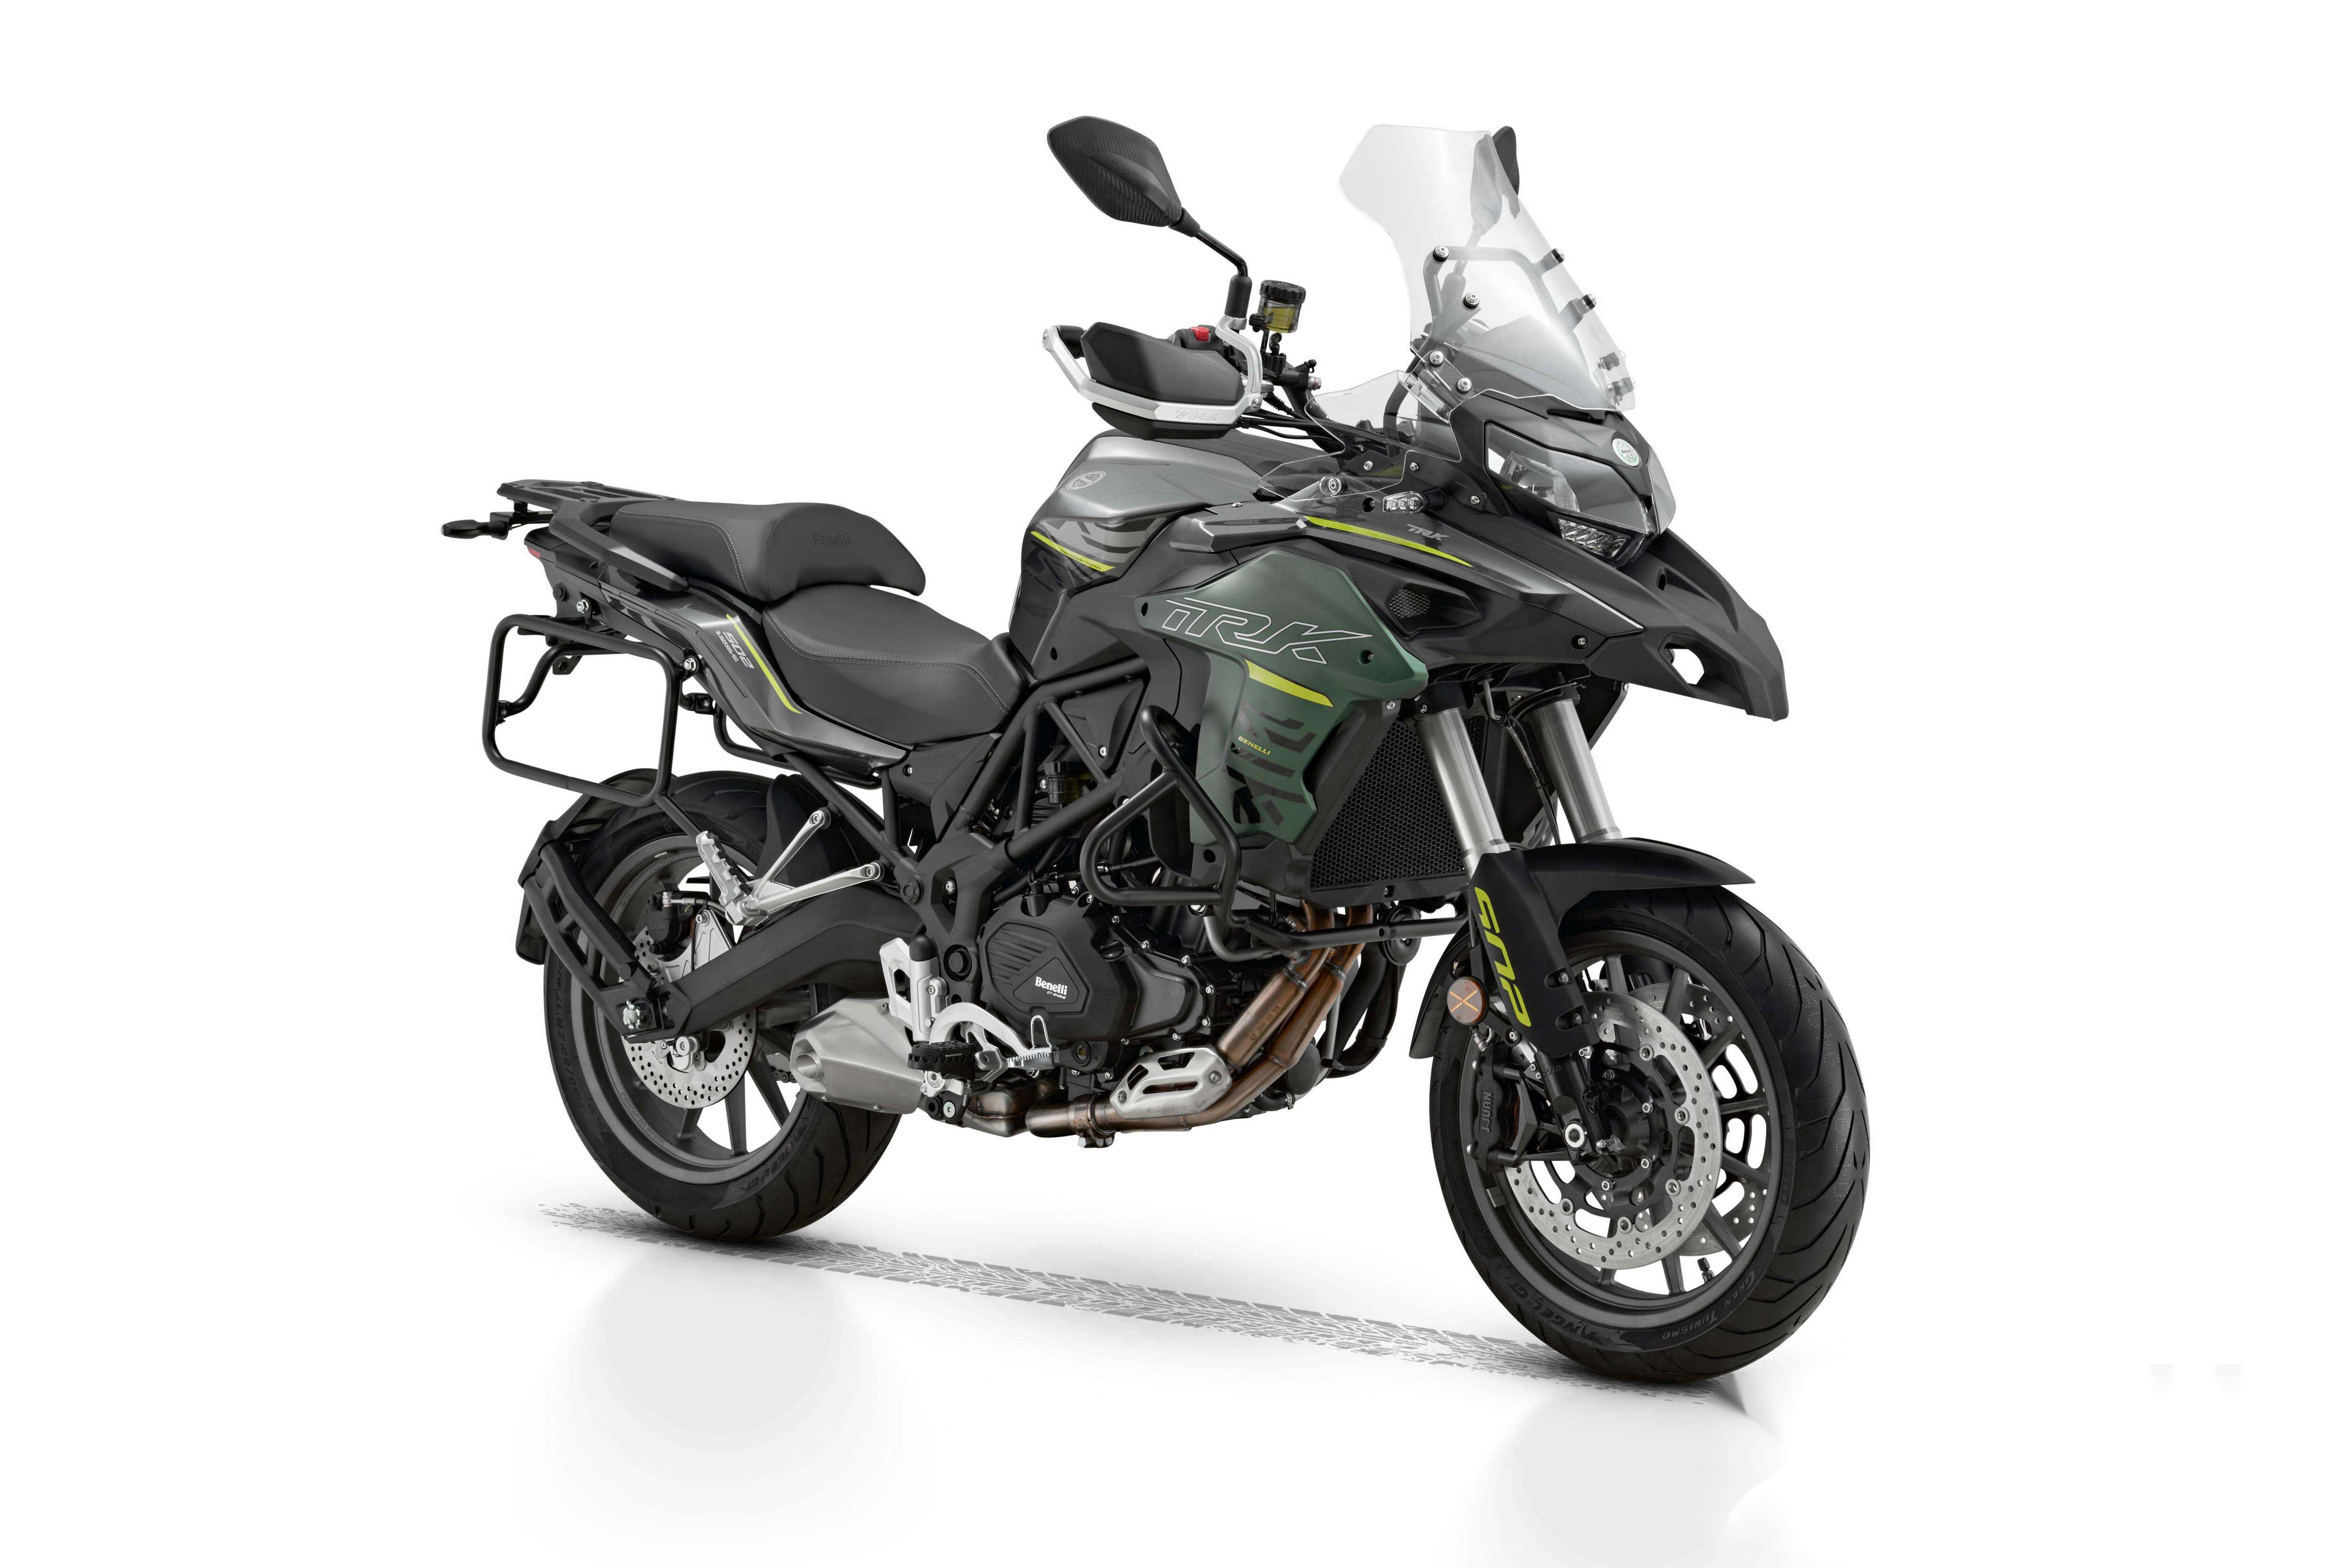 Benelli Adult 6-speed Motorcycle 502cc TRK Premium Rally car An affordable four-stroke chain drive motorcycle supplier